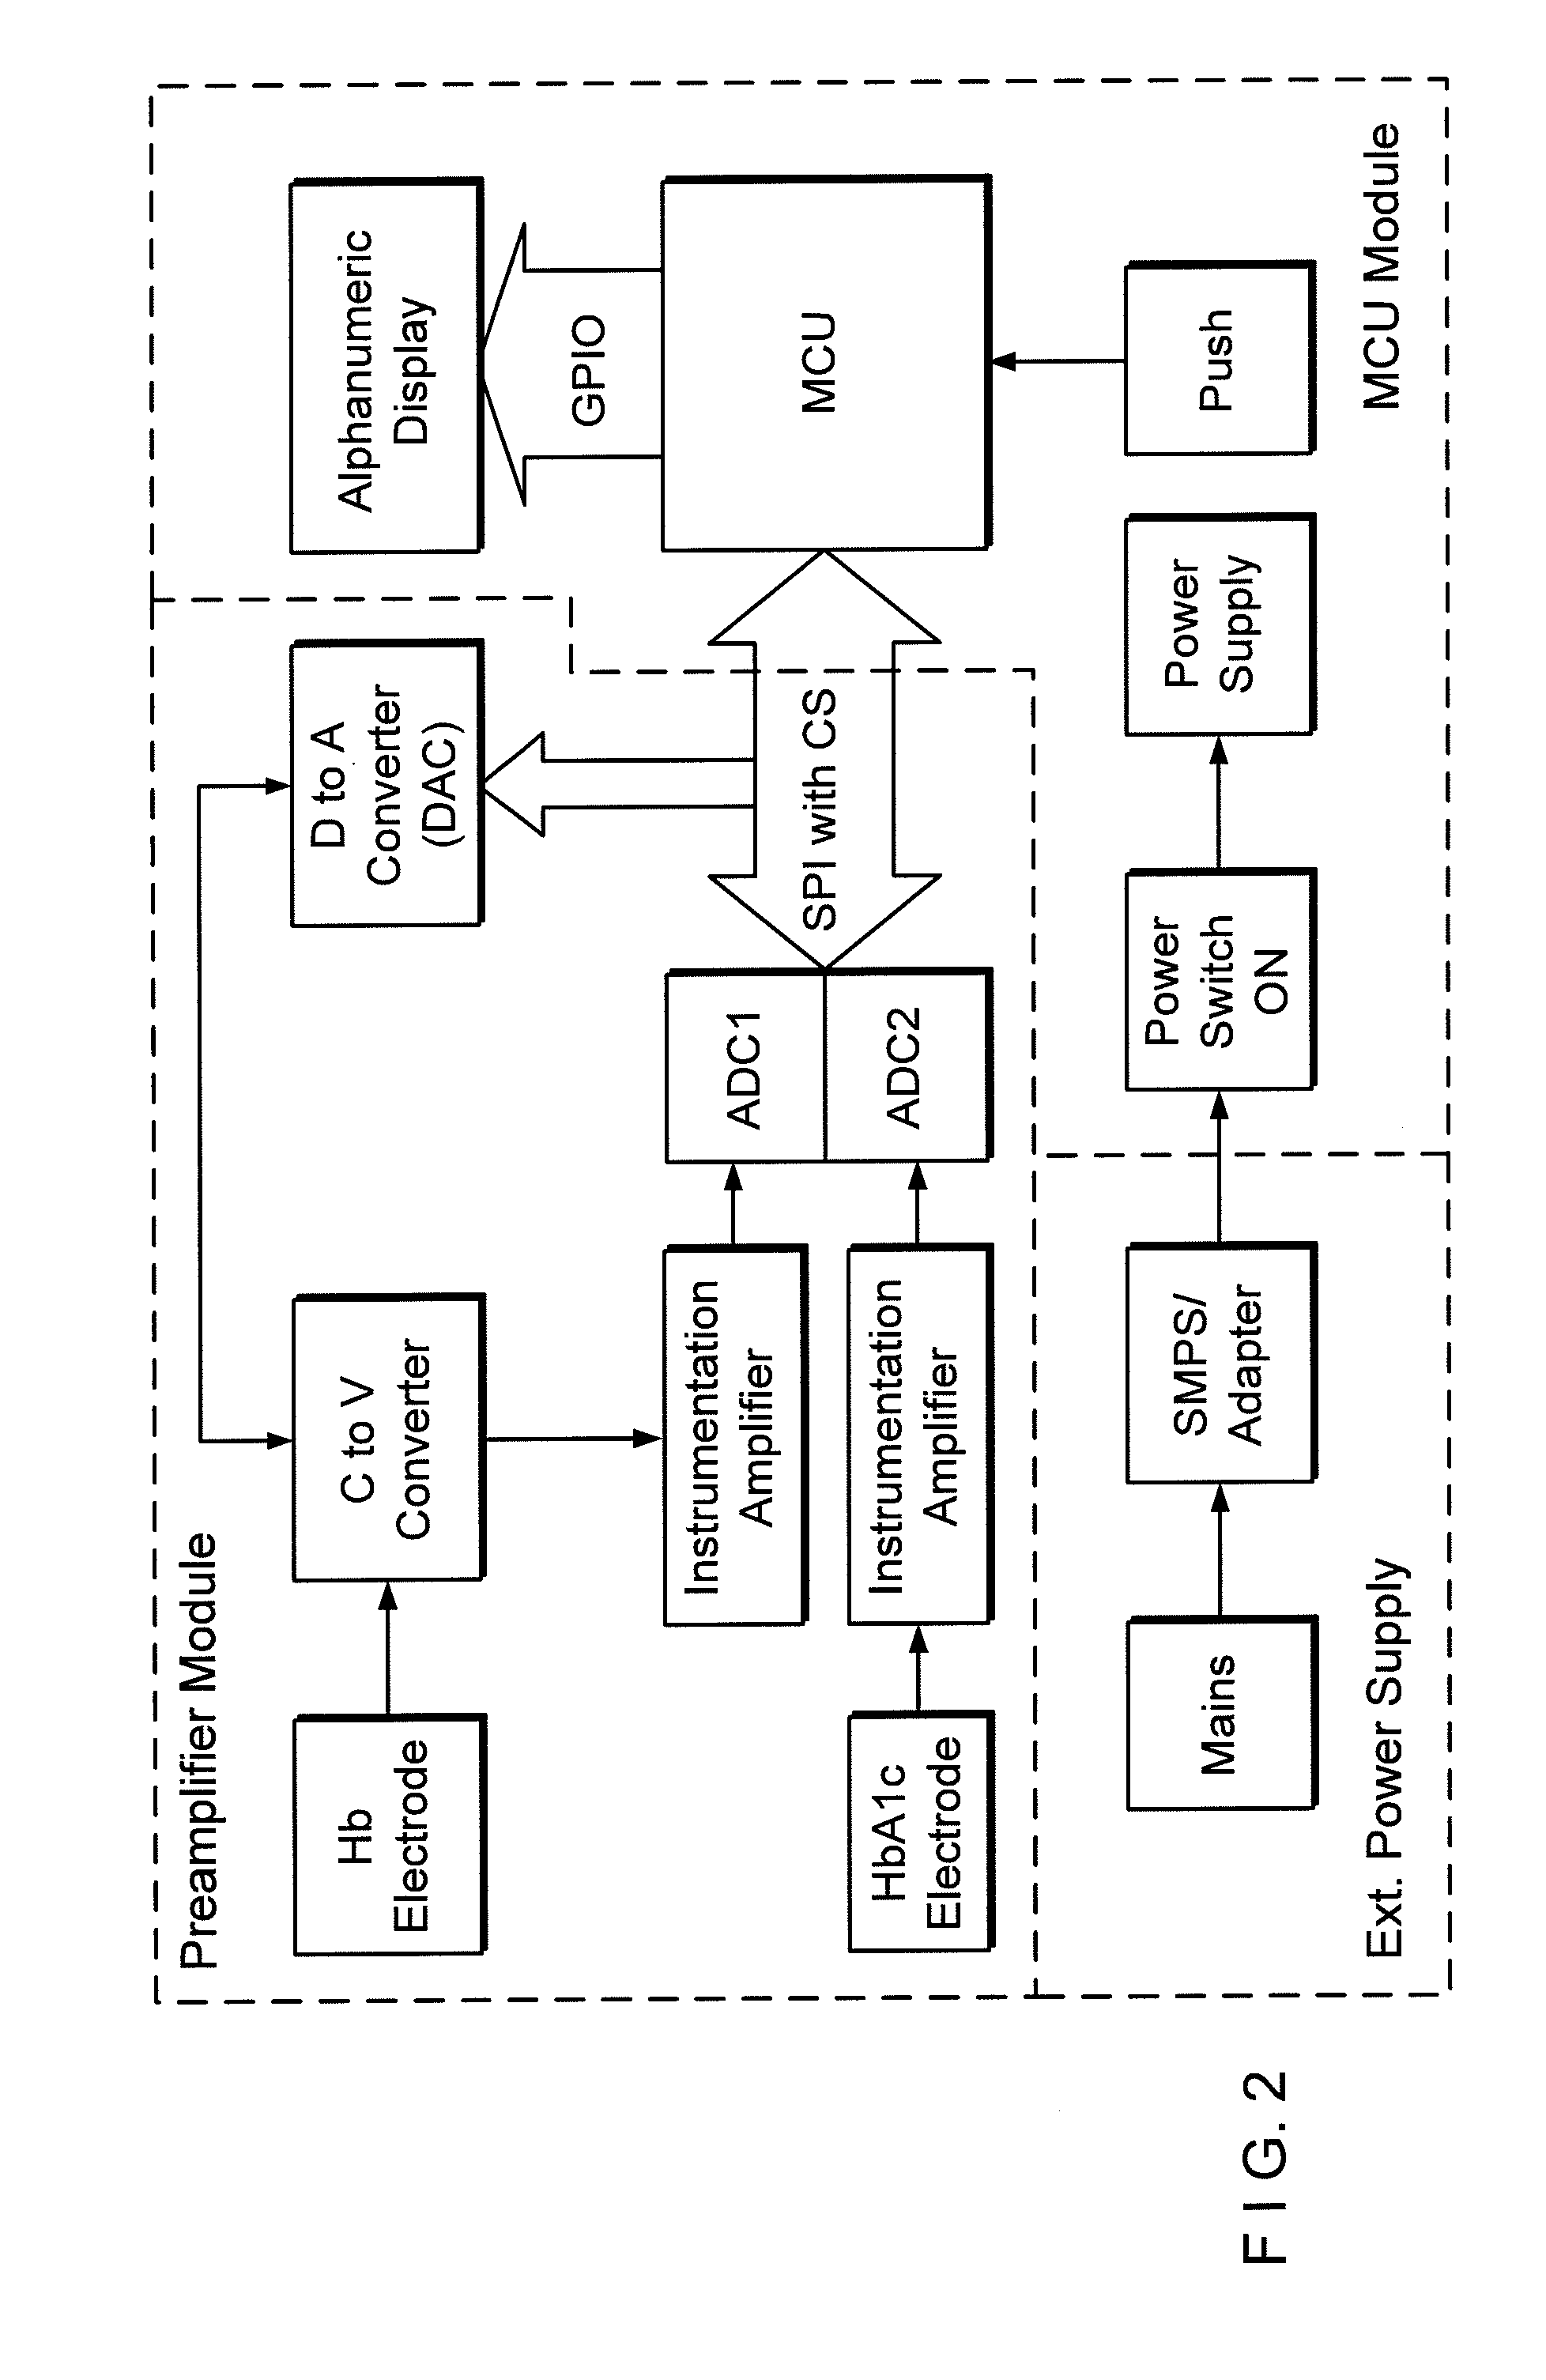 Non-enzymatic electrochemical method for simultaneous determination of total hemoglobin and glycated hemoglobin